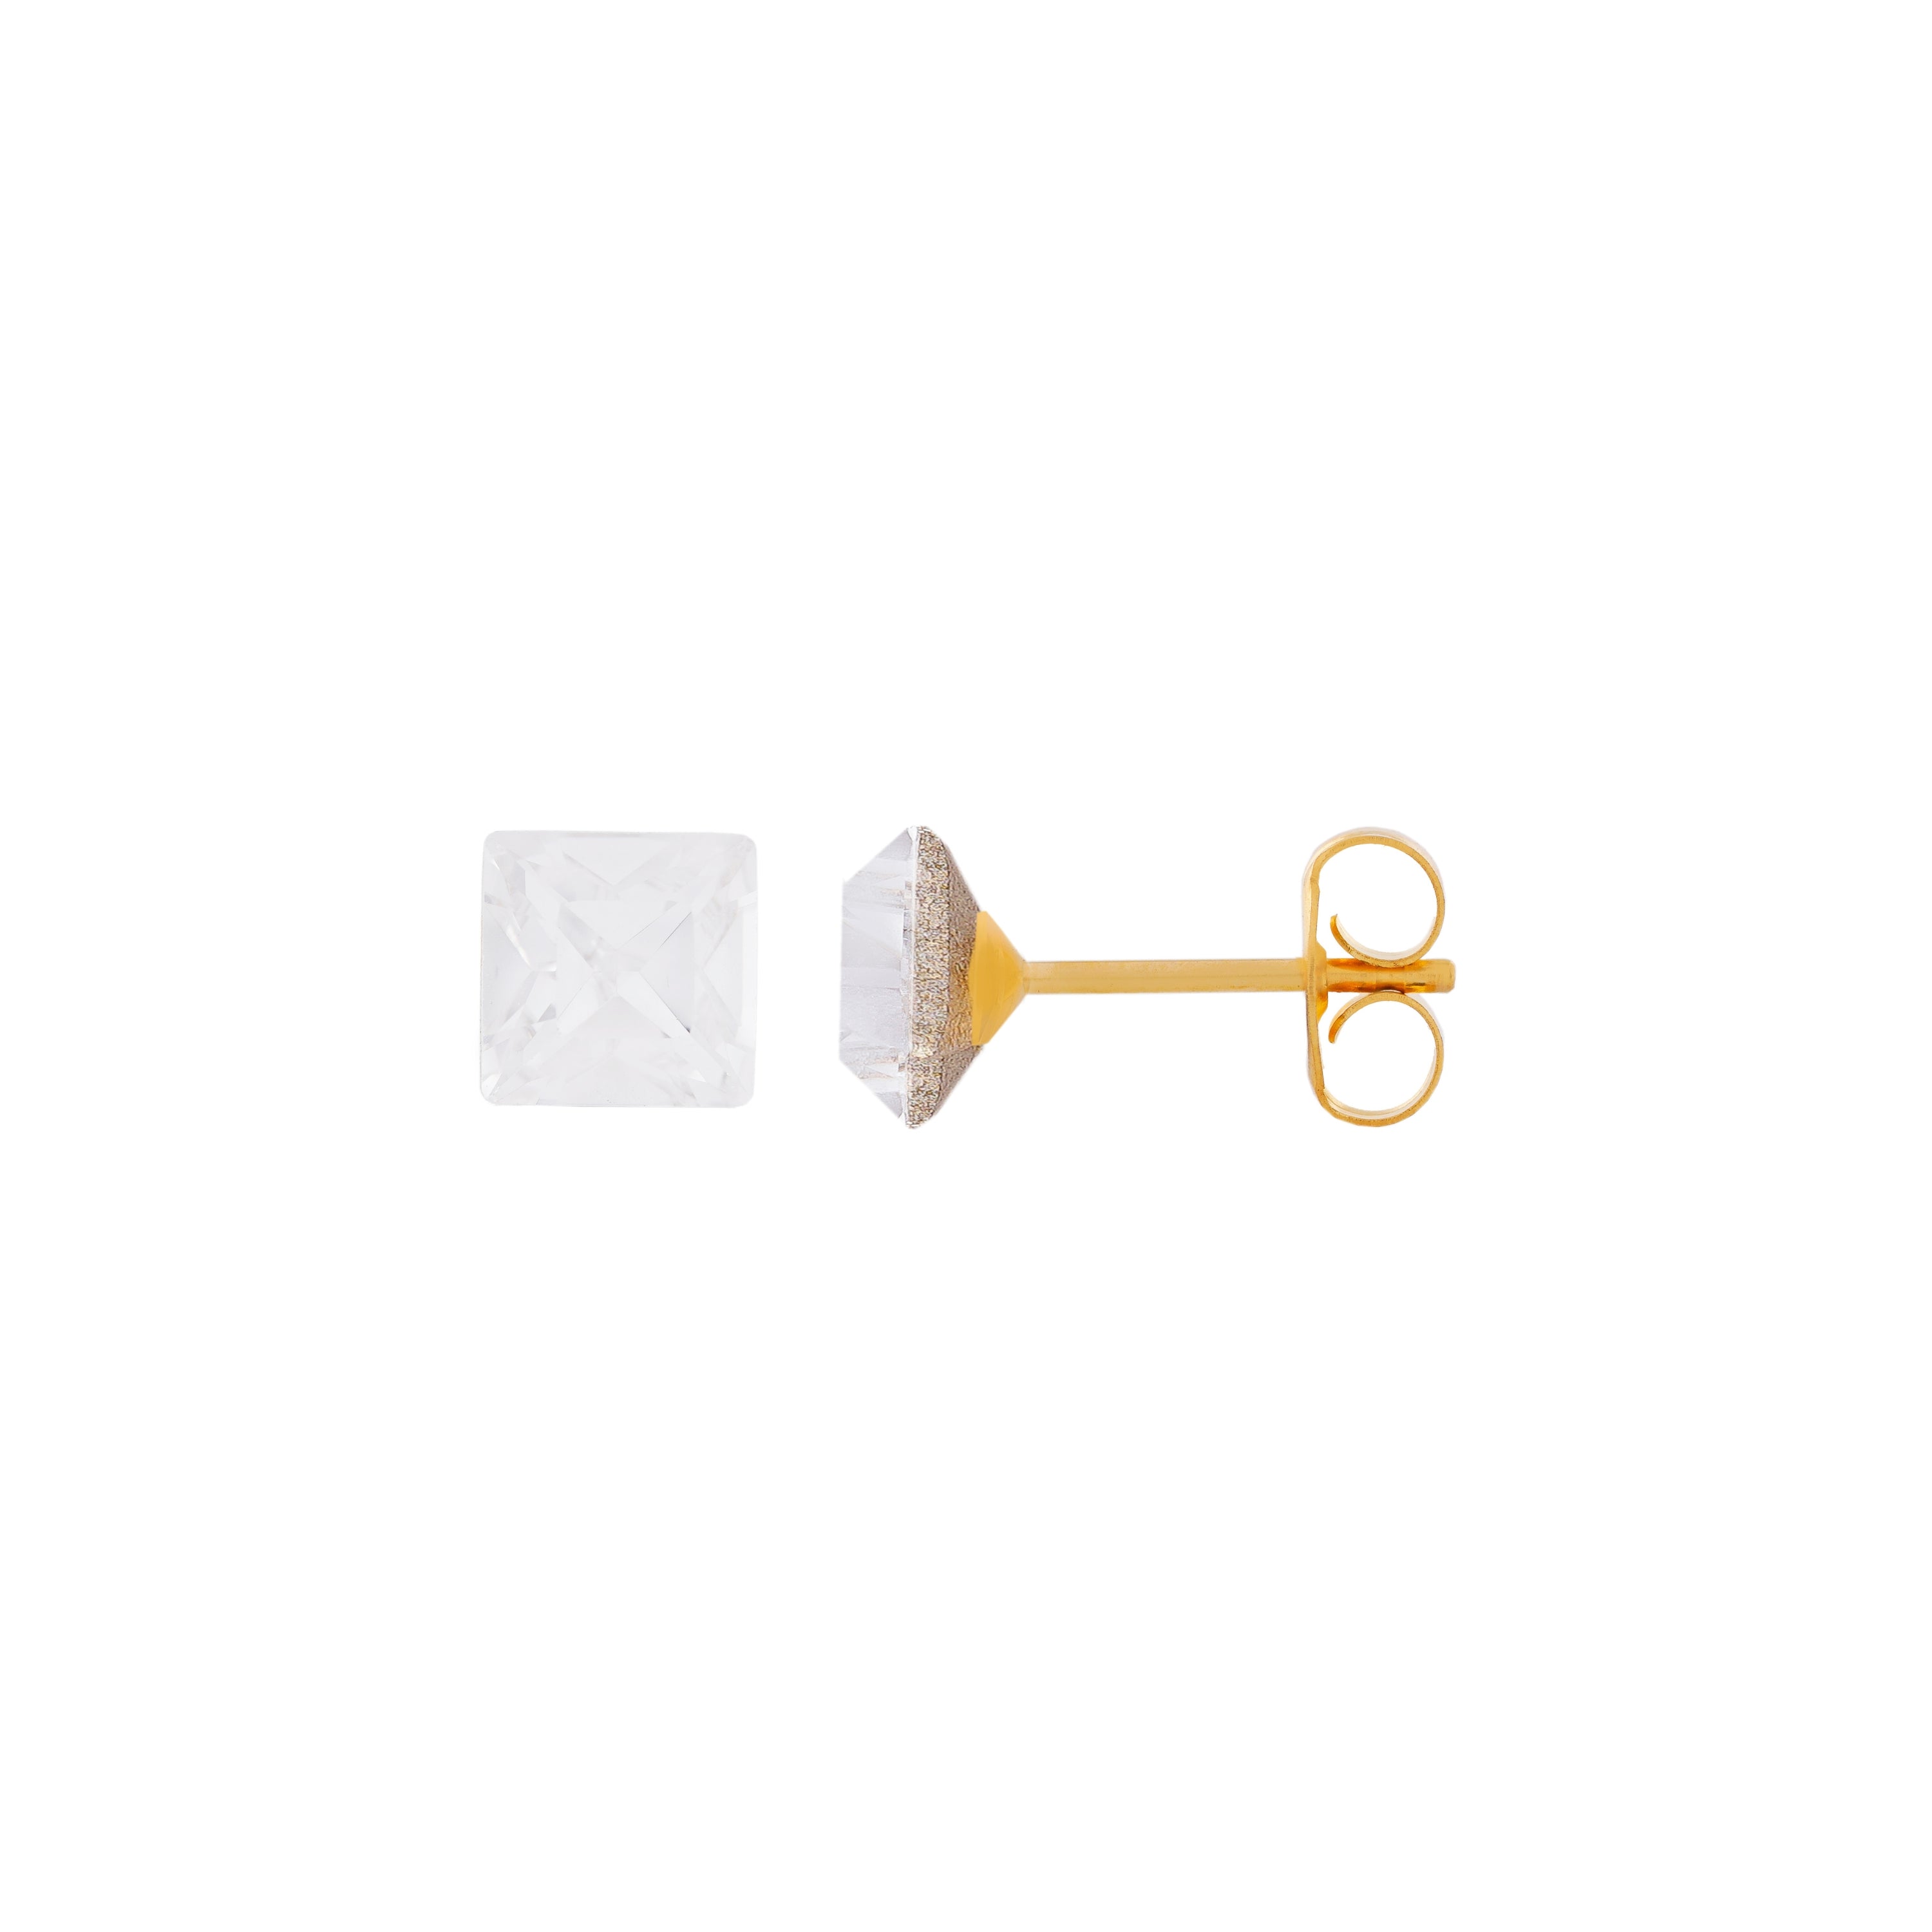 6X6MM Austrian Crystal Square 24K Pure Gold Plated Ear Studs | MADE IN USA | Ideal for everyday wear